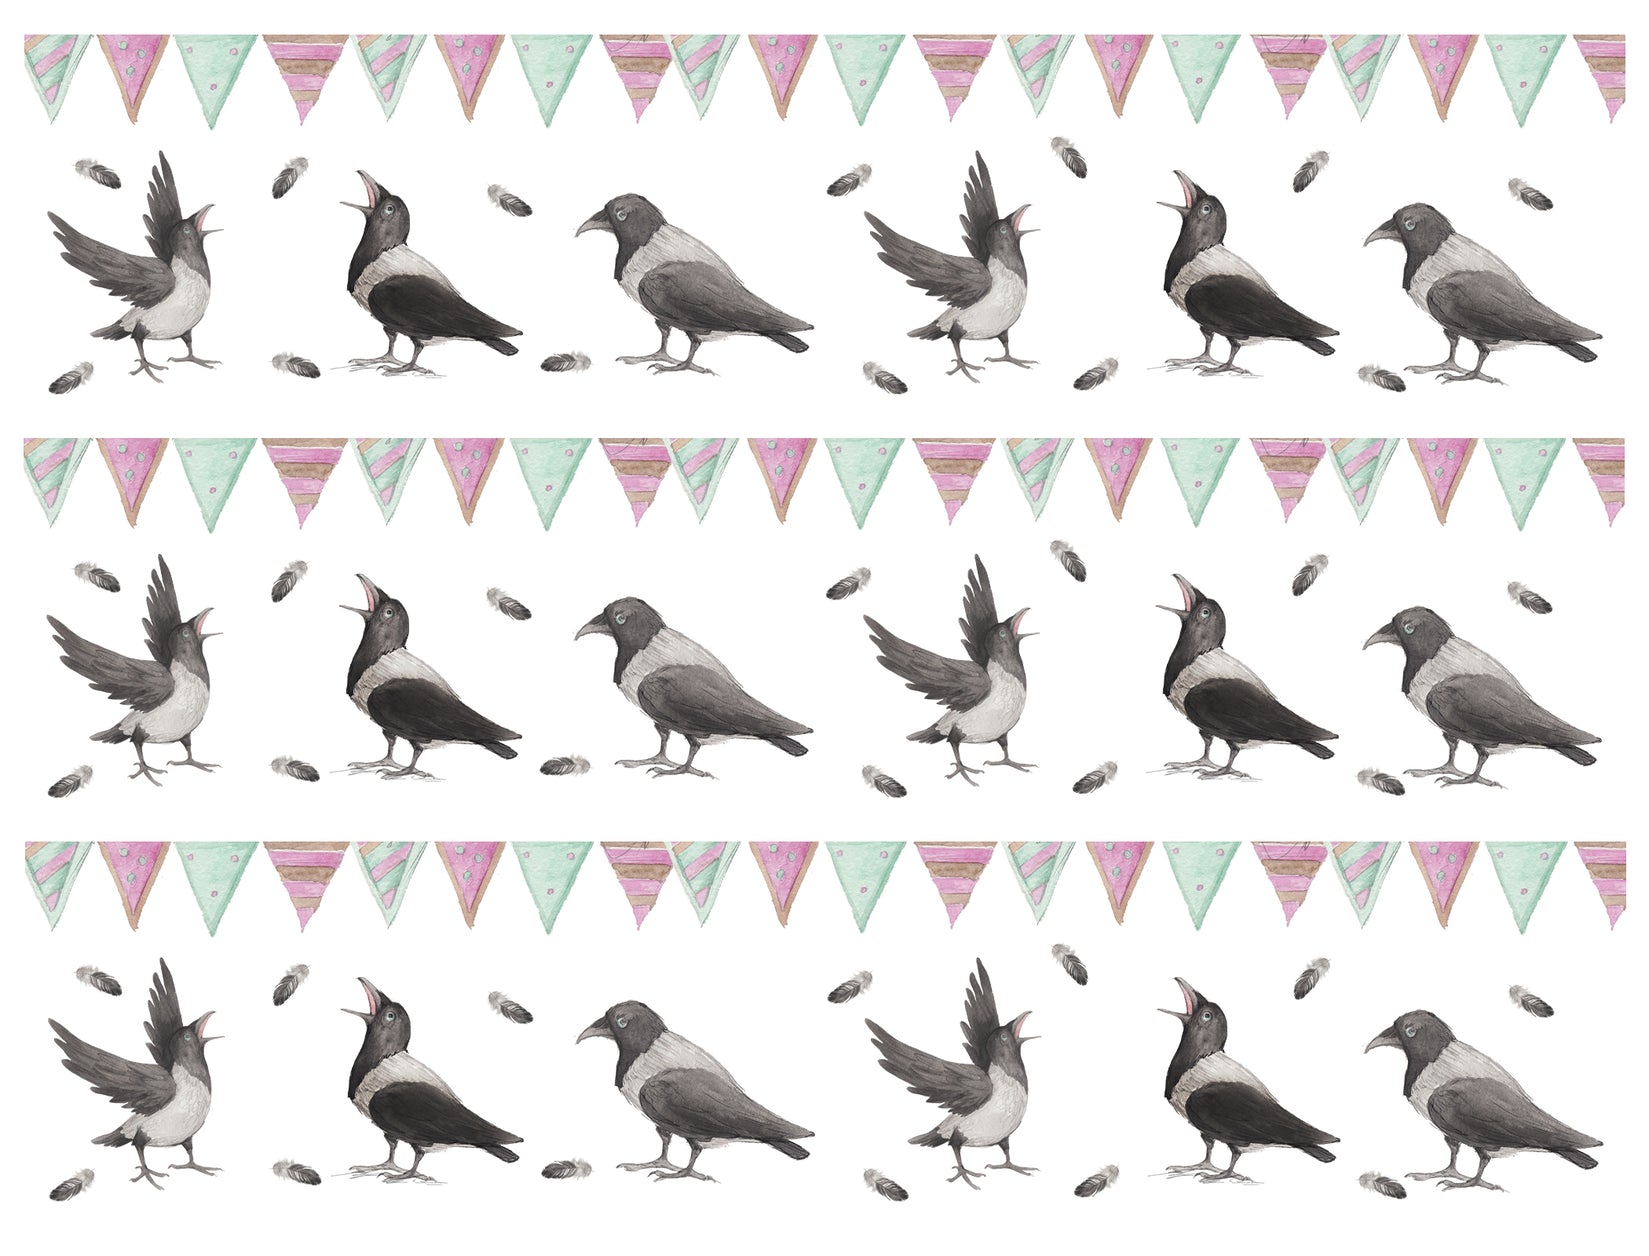 Crow Hatchlings on the Way Edible Cake Topper Image Strips ABPID56281